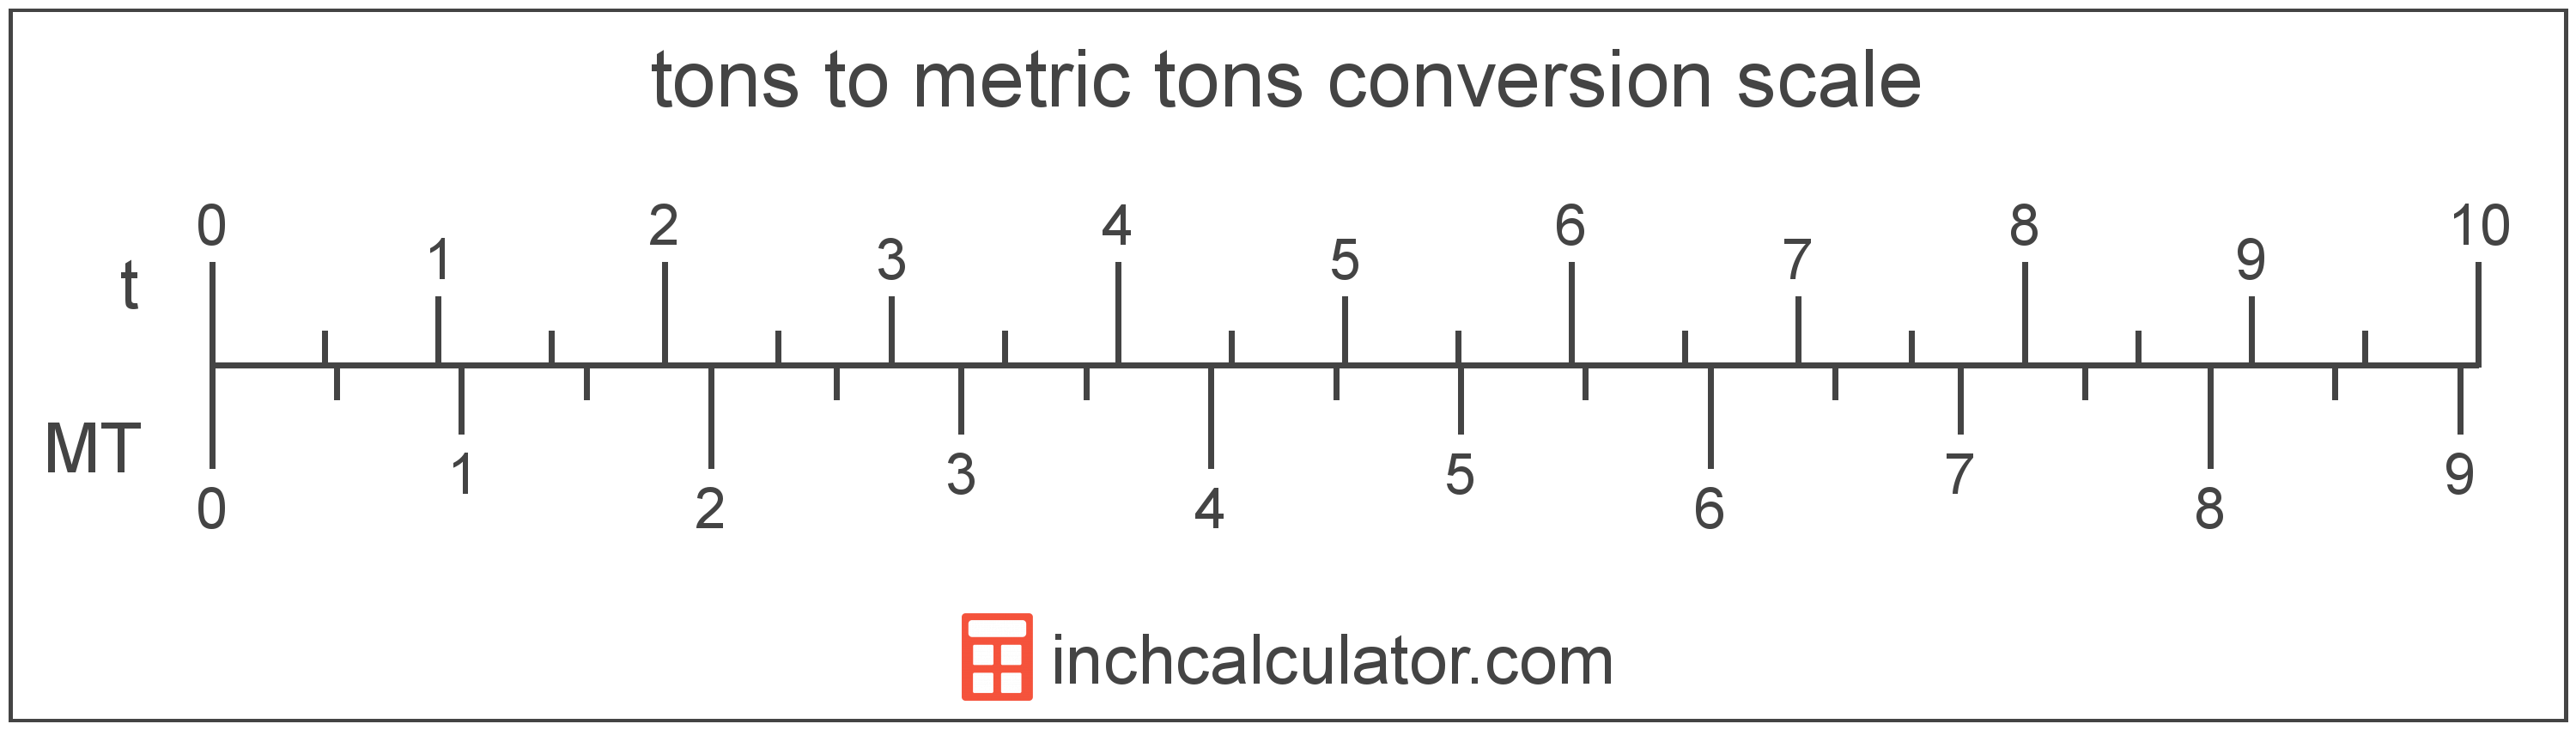 conversion scale showing tons and equivalent metric tons weight values